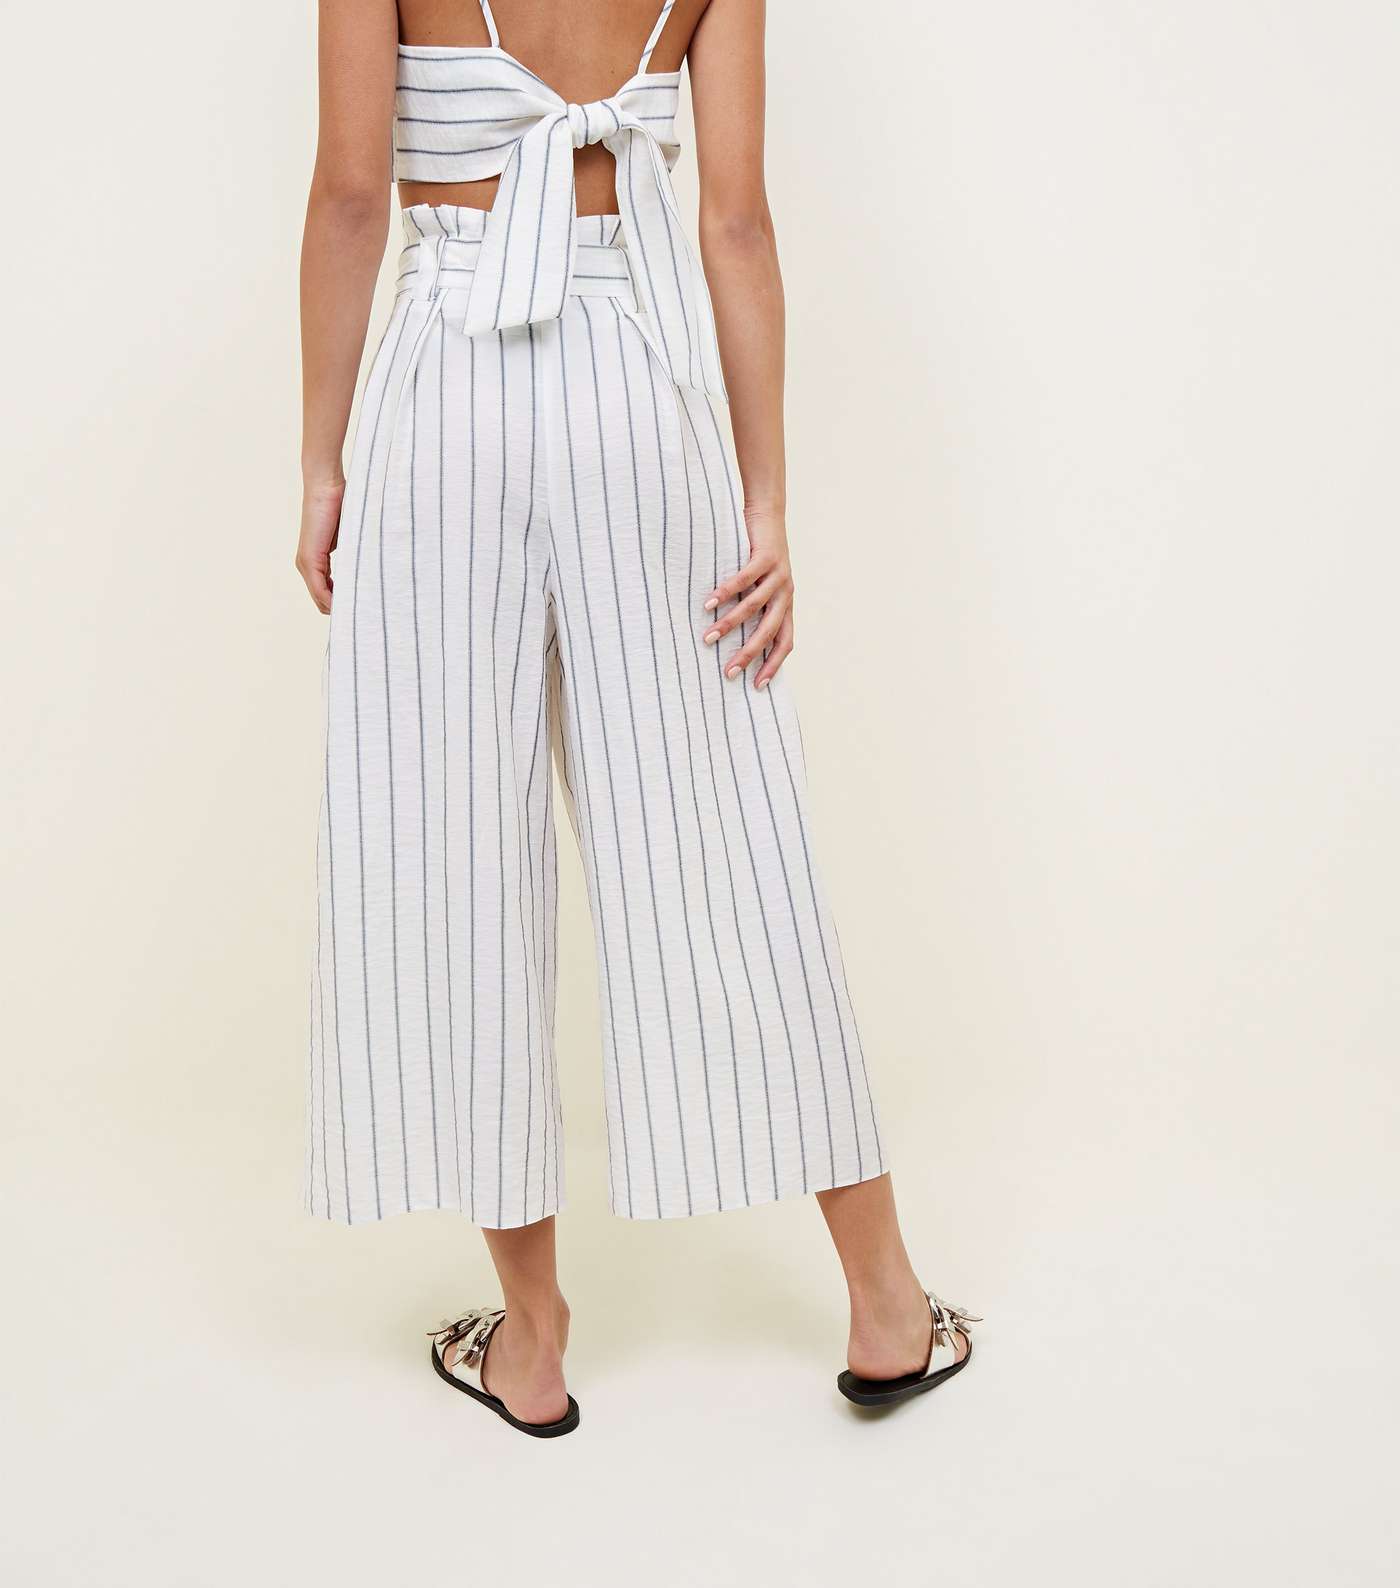 White Stripe Linen-Look Paperbag Culottes Image 3